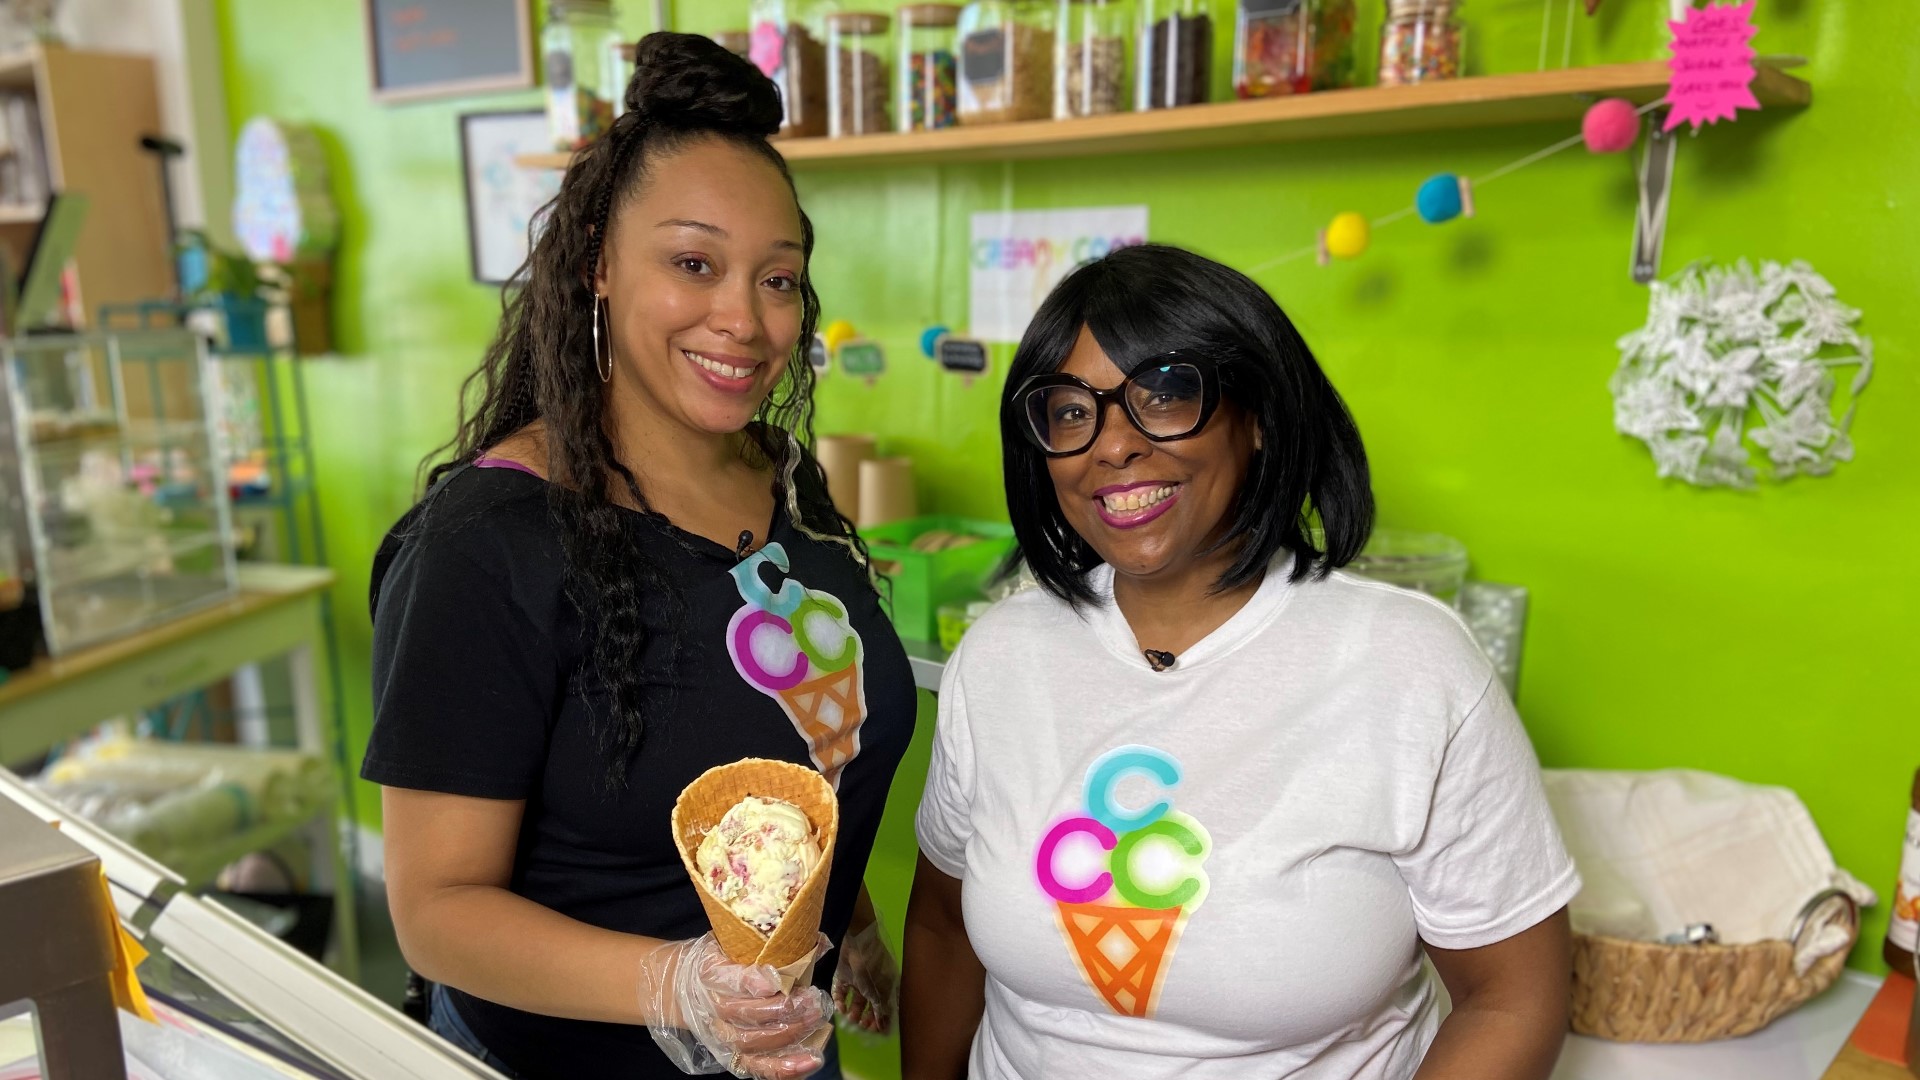 The family-owned ice cream shop in Rainier Beach features handmade waffle cones and an array of toppings. #k5evening